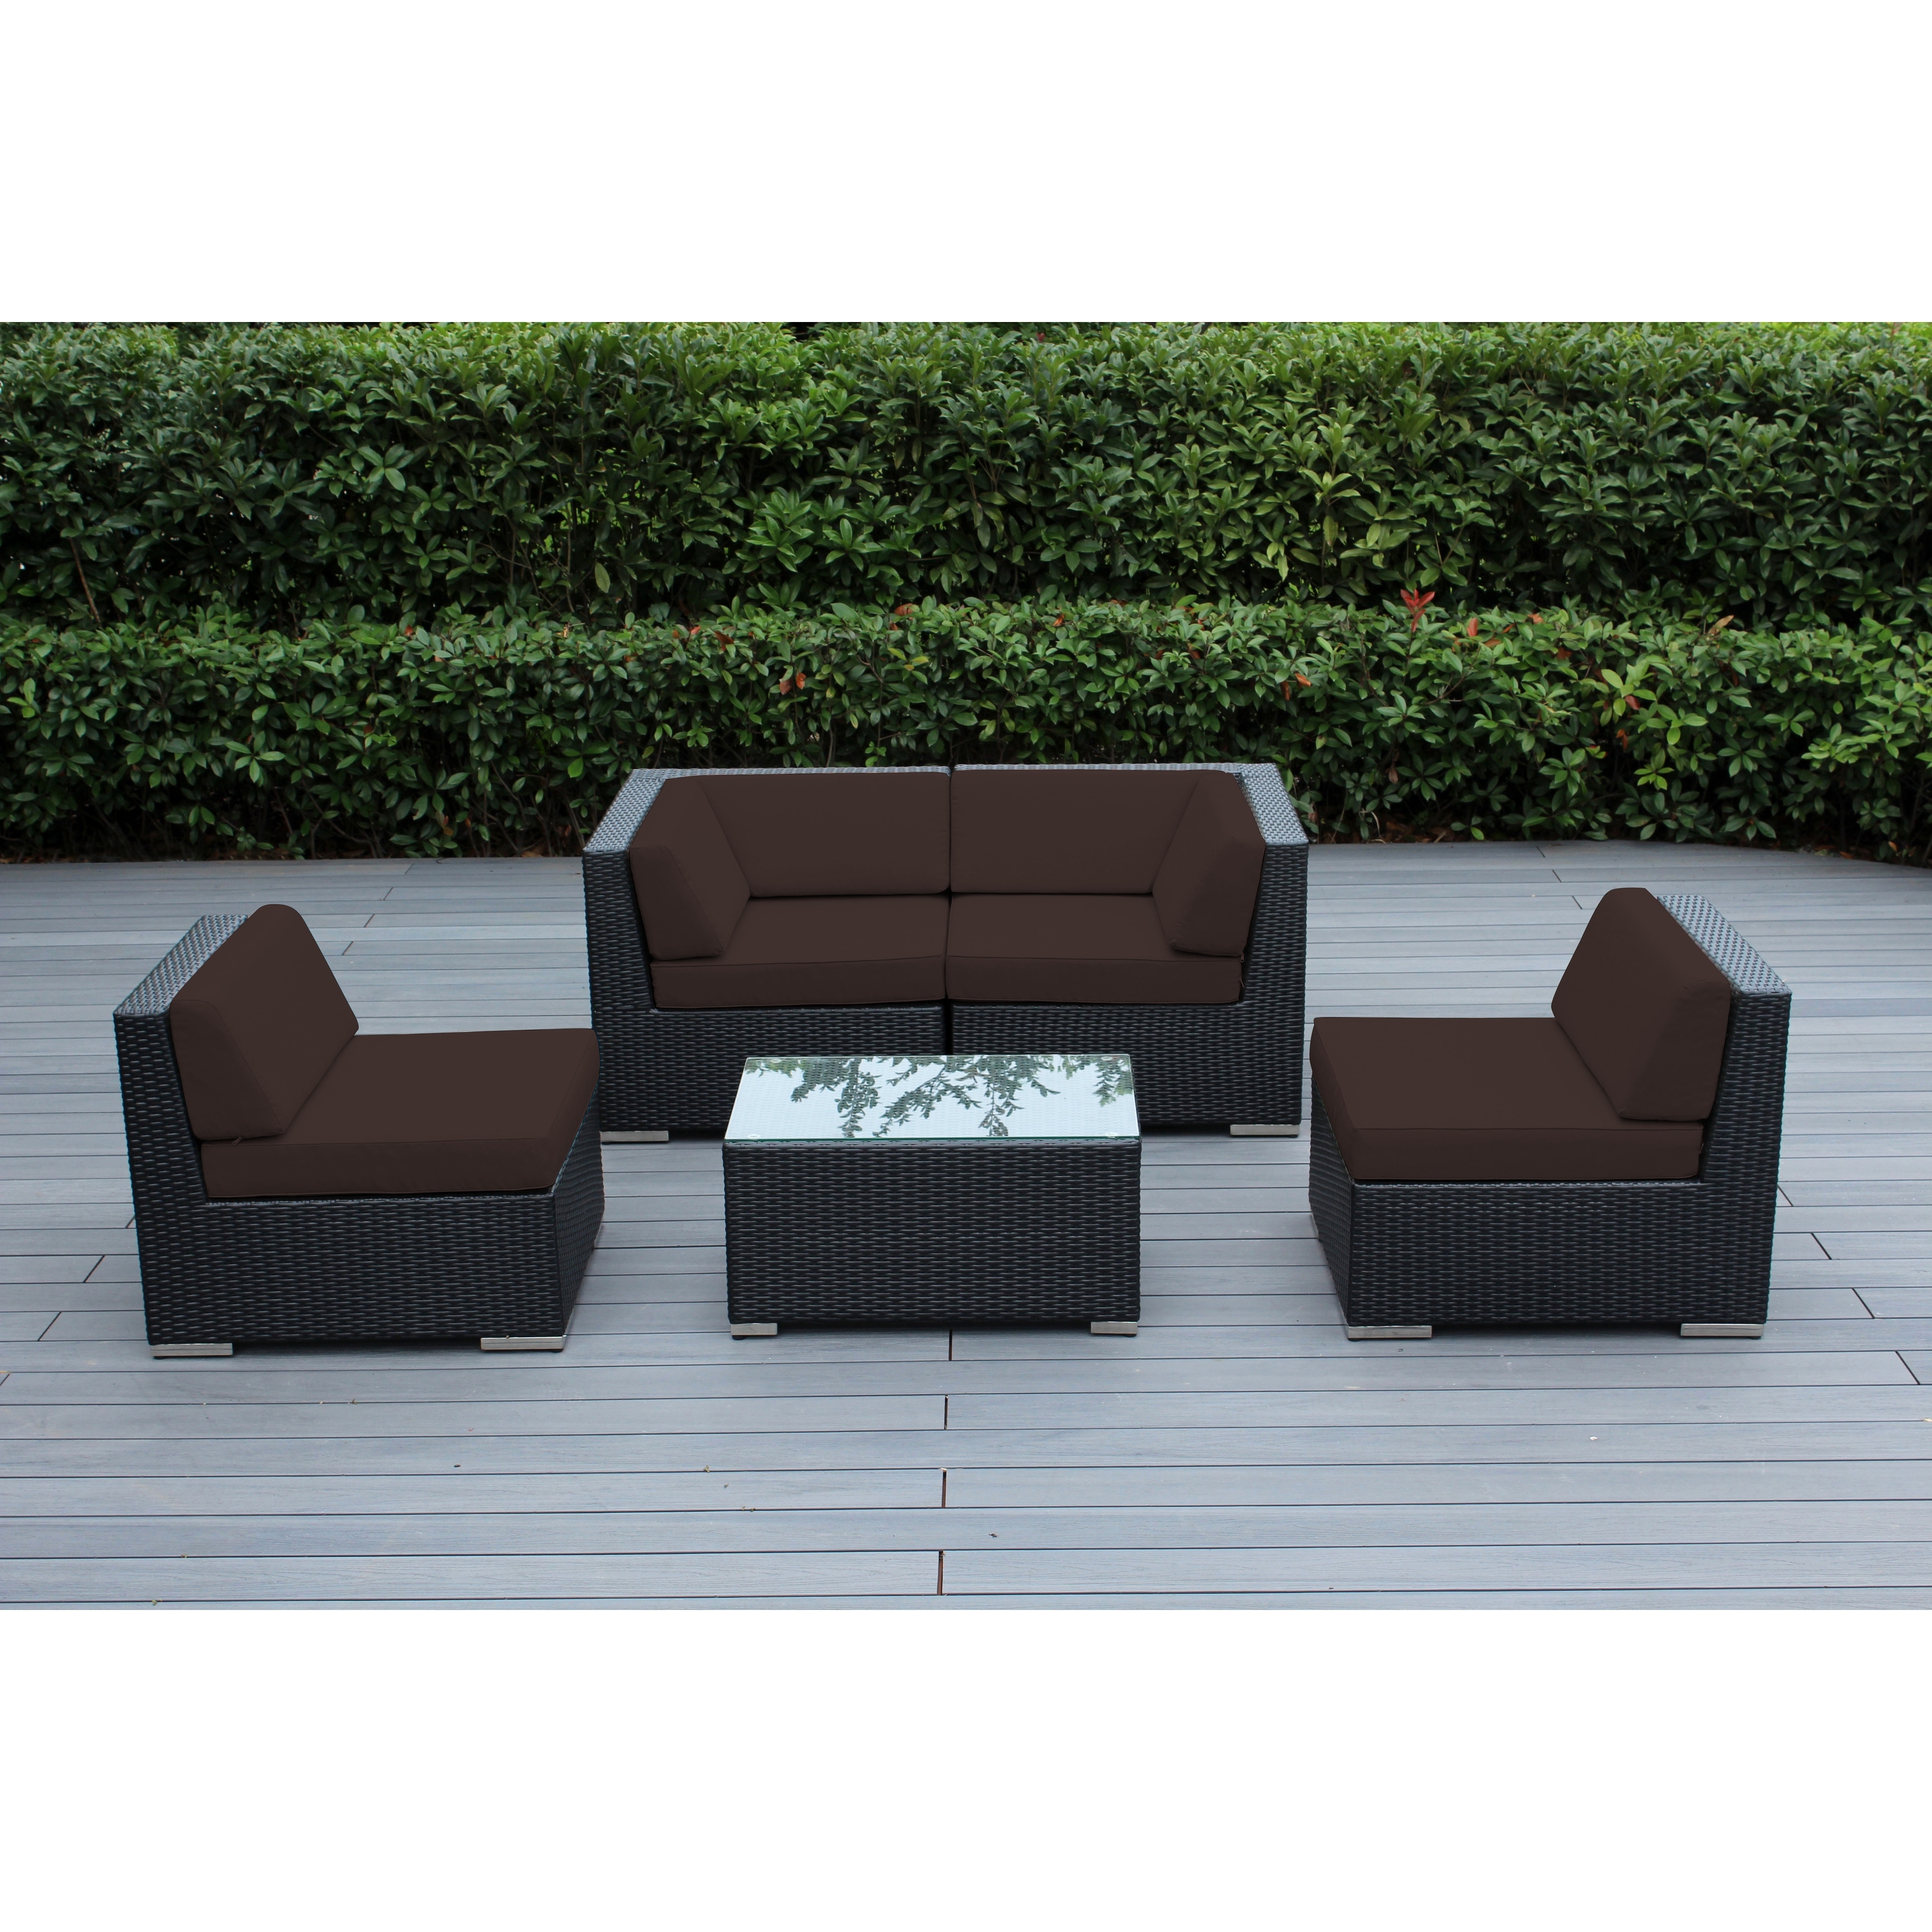 Ohana Outdoor Patio 5 Piece Black Wicker Sectional With Cushions - No Assembly